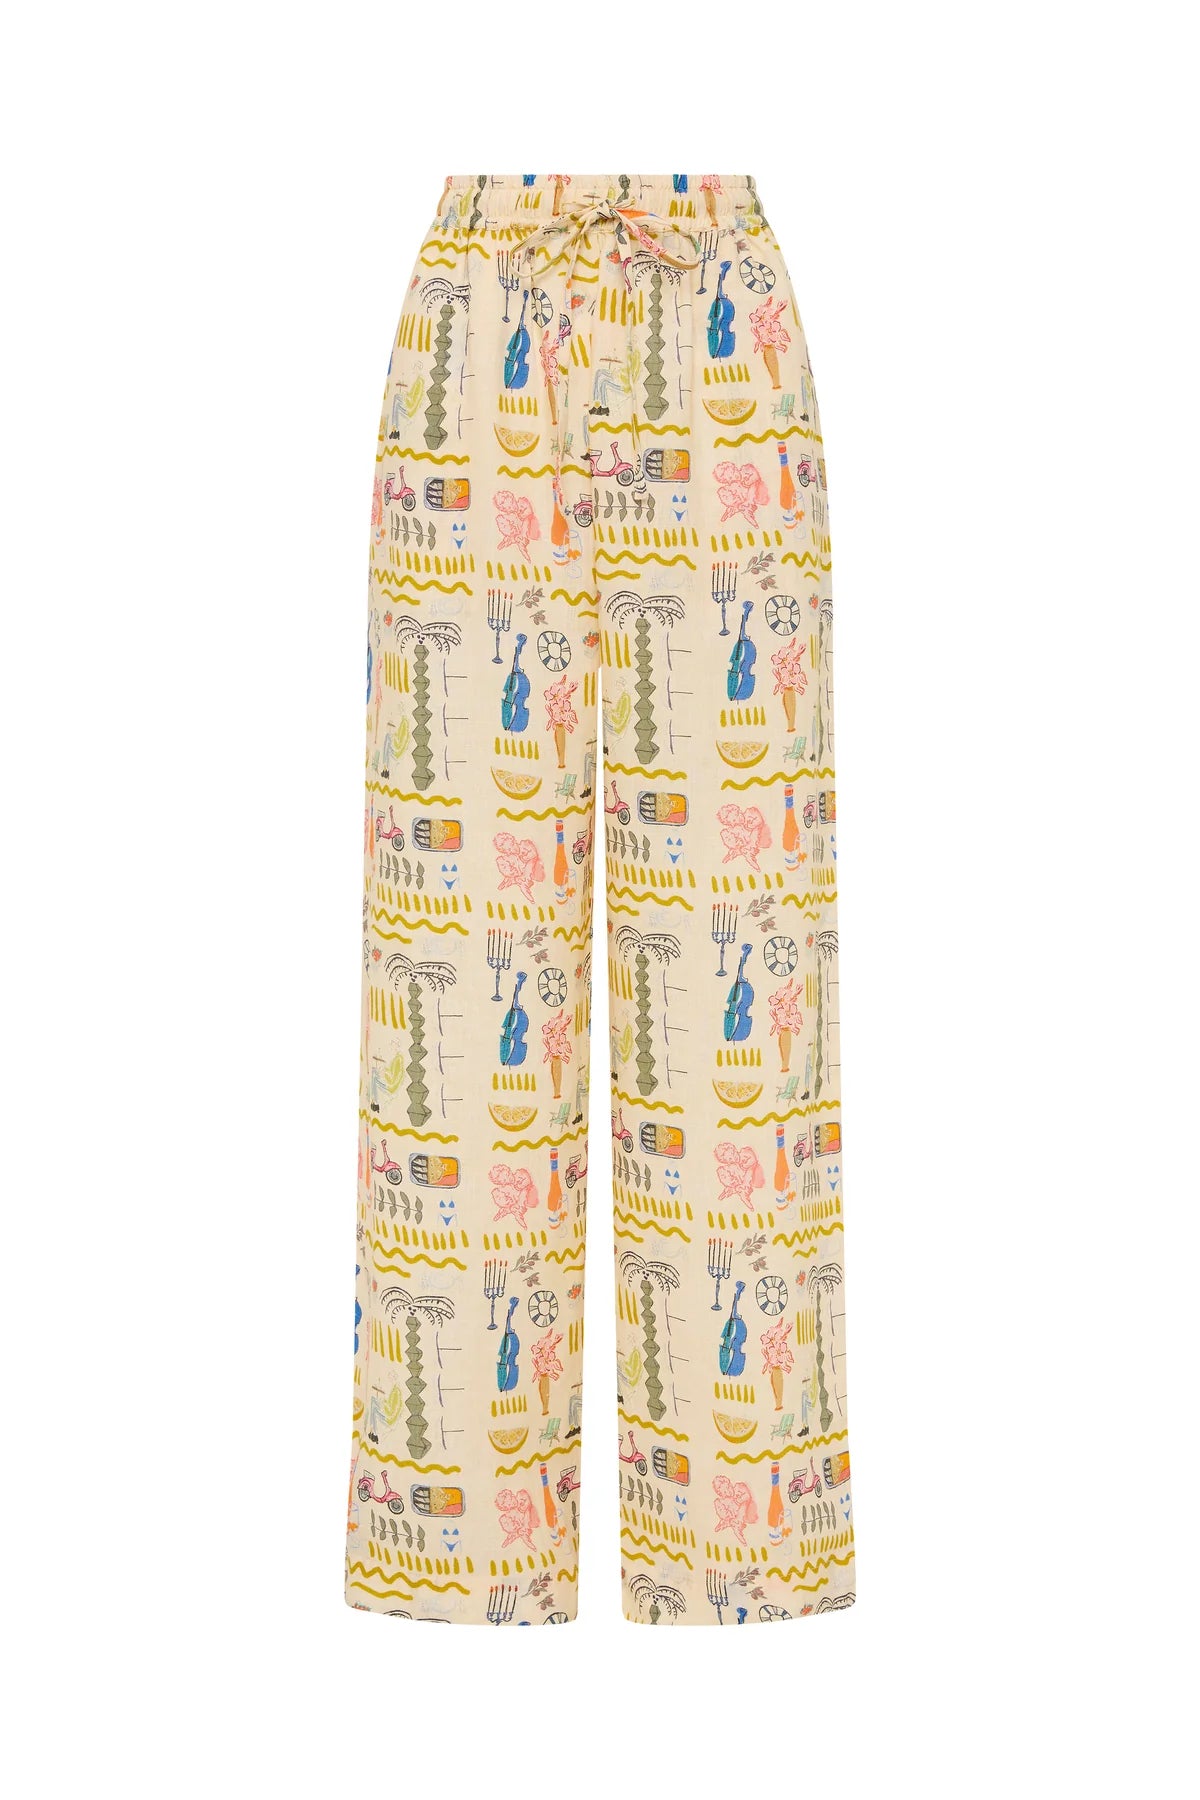 Linen drawstring trousers with a holiday inspired print